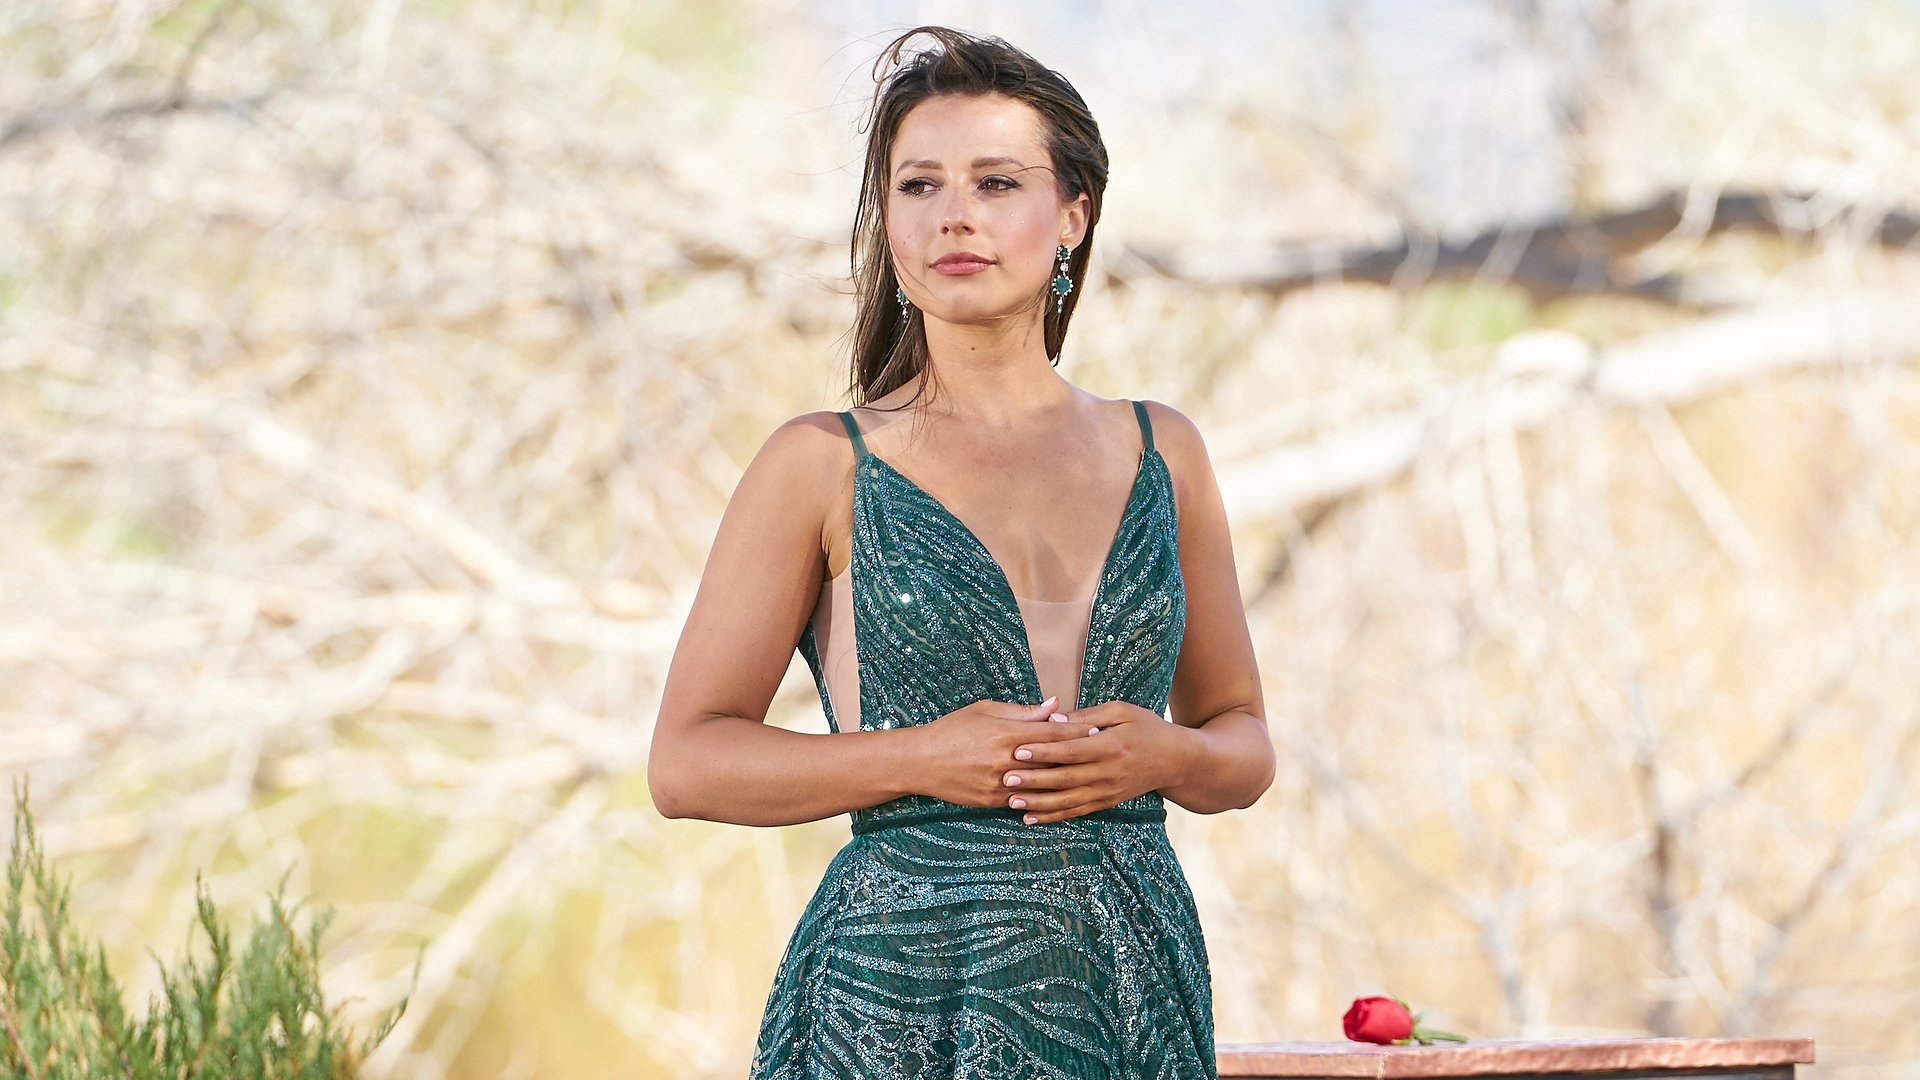 Katie Thurston stands in front of a single rose in ‘The Bachelorette’ Season 17 finale in 2021